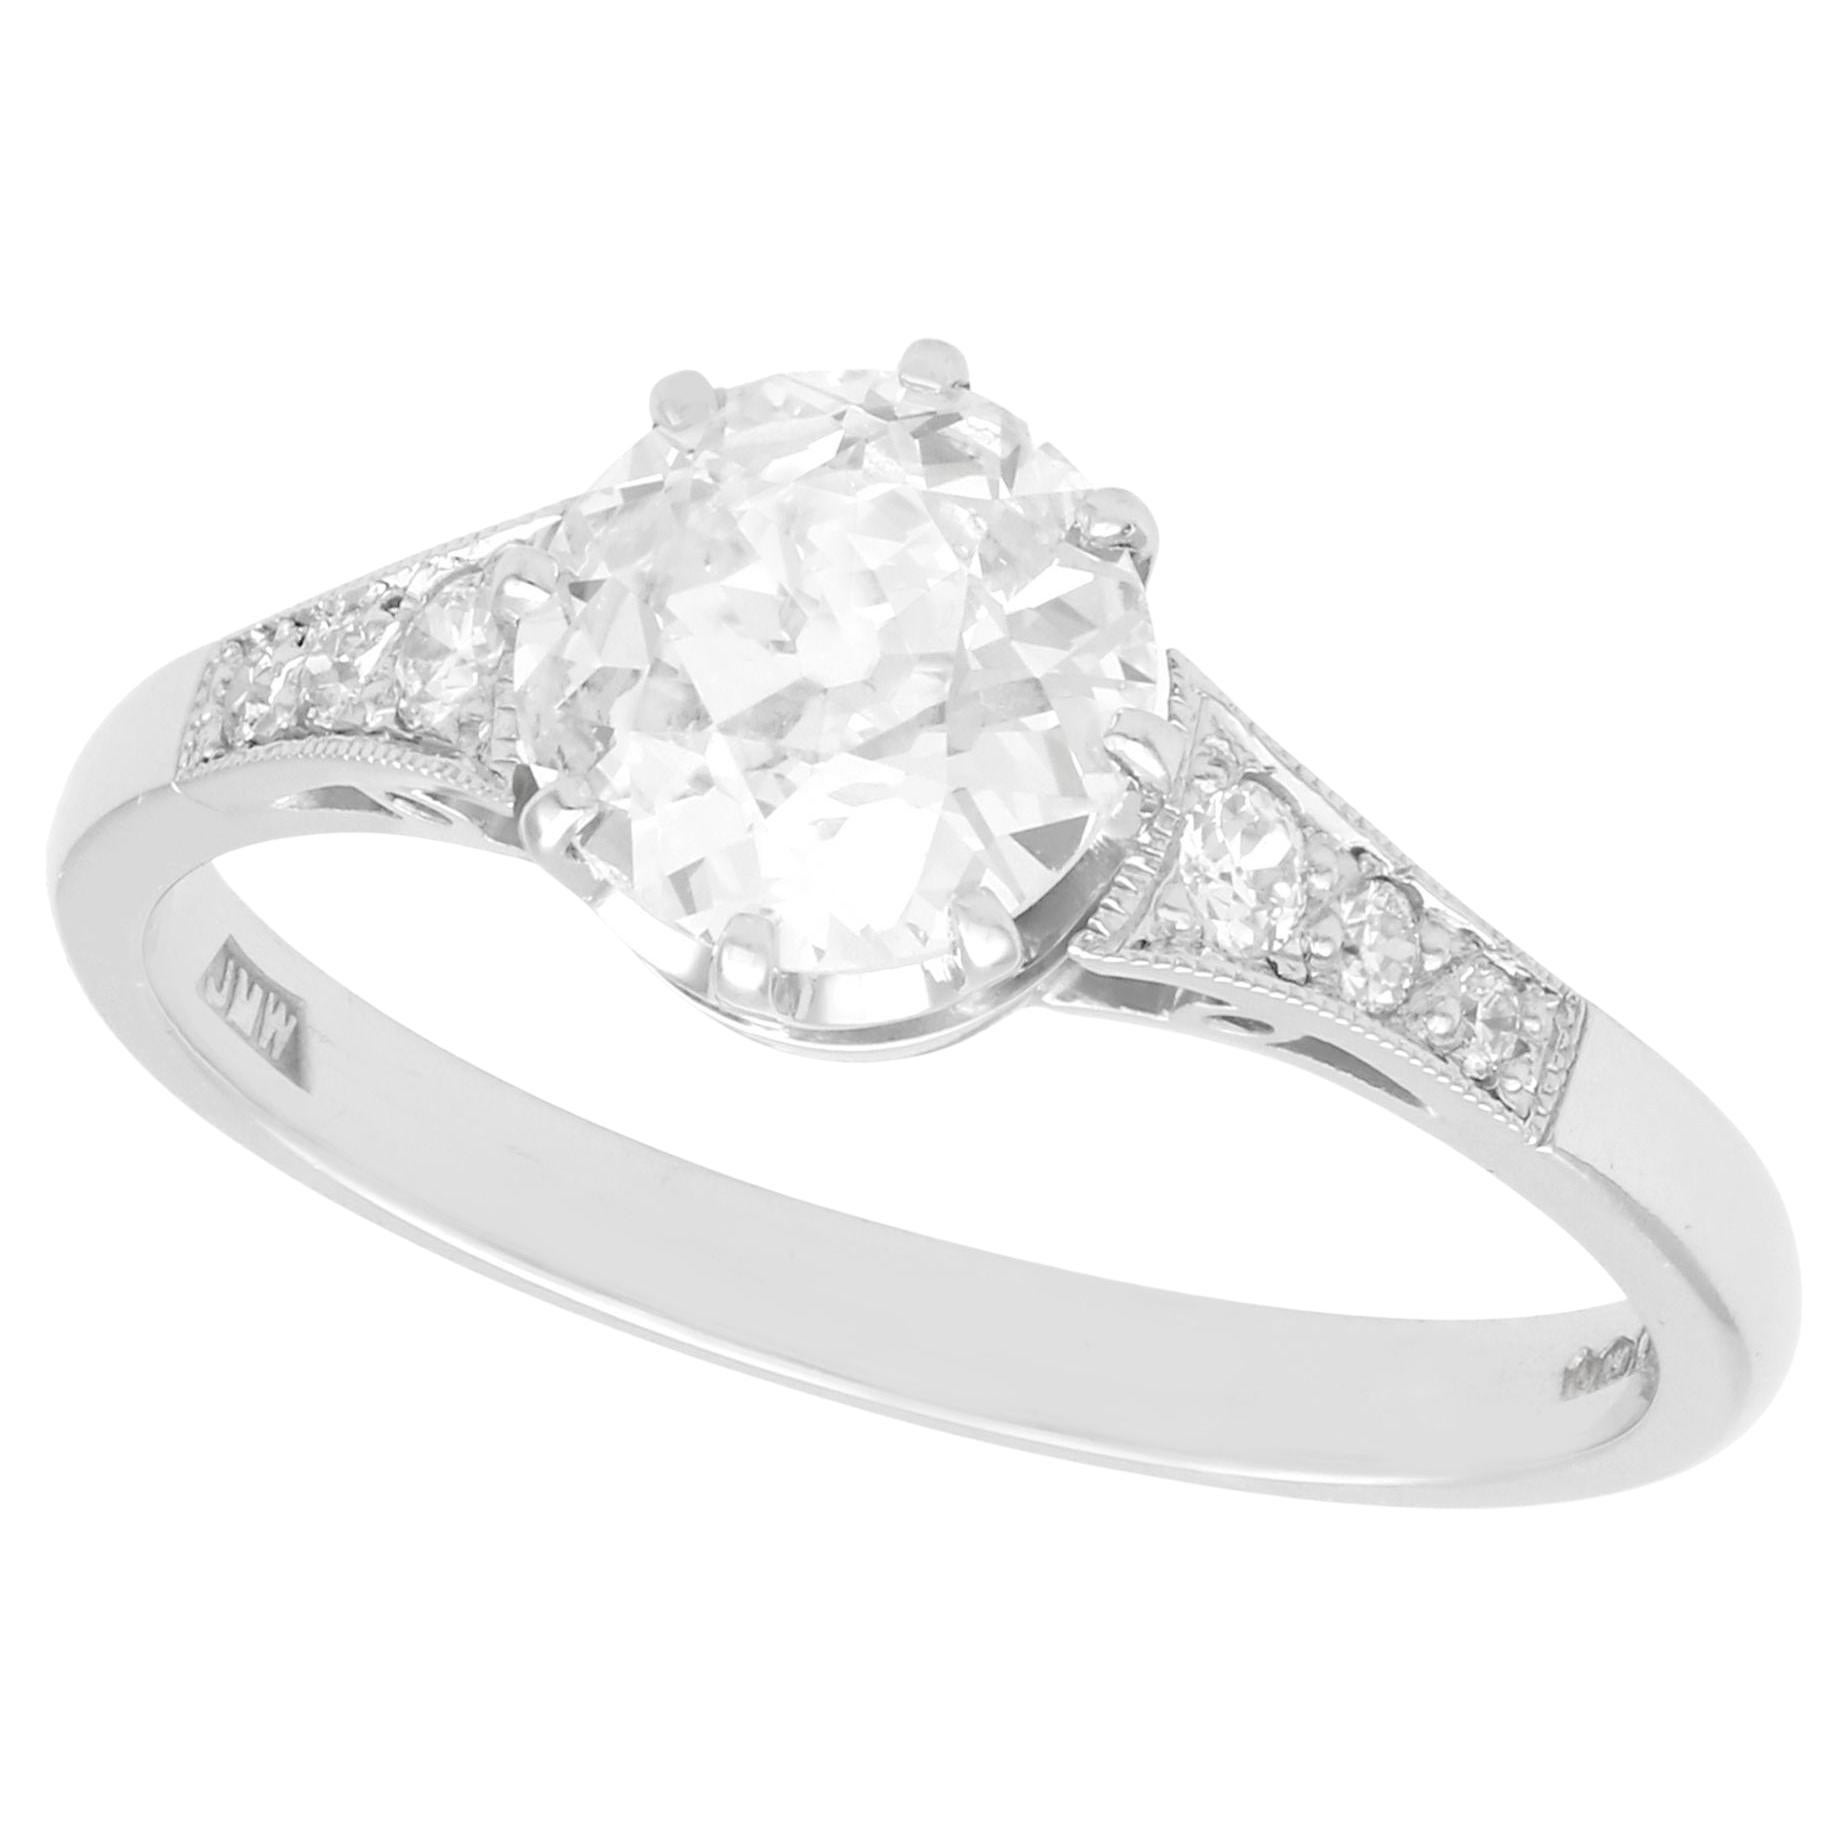 English 1.29 Carat Diamond and Platinum Solitaire Engagement Ring For Sale